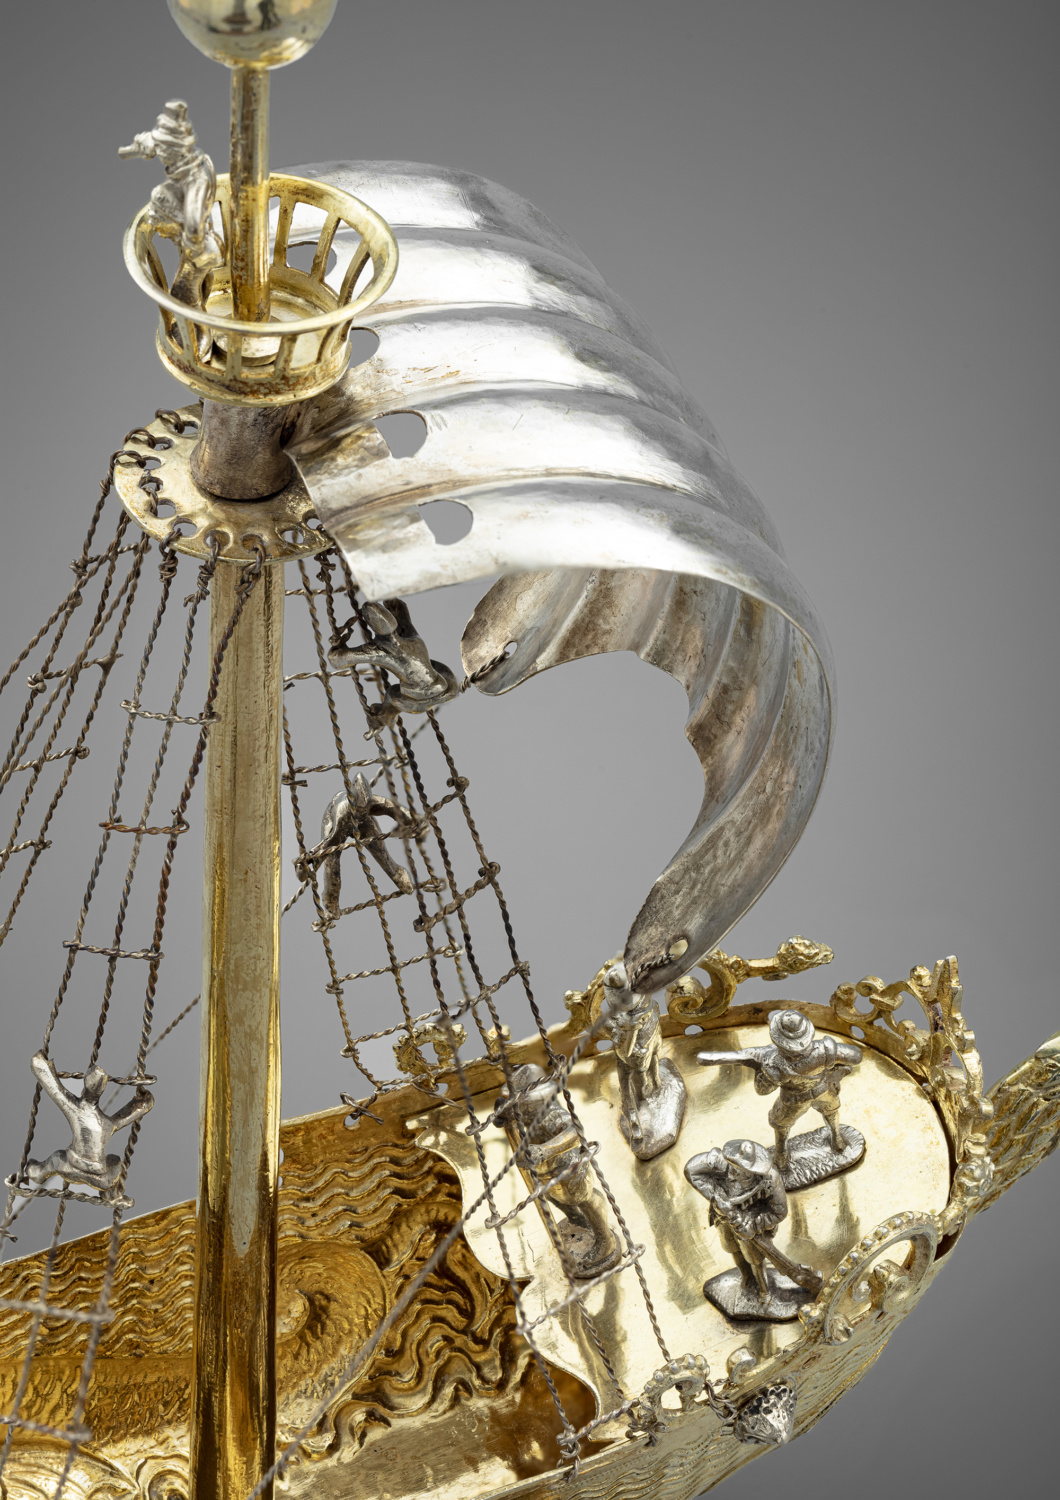 A silver and silver-gilt drinking cup in the shape of a vessel on wheels - Galerie Kugel